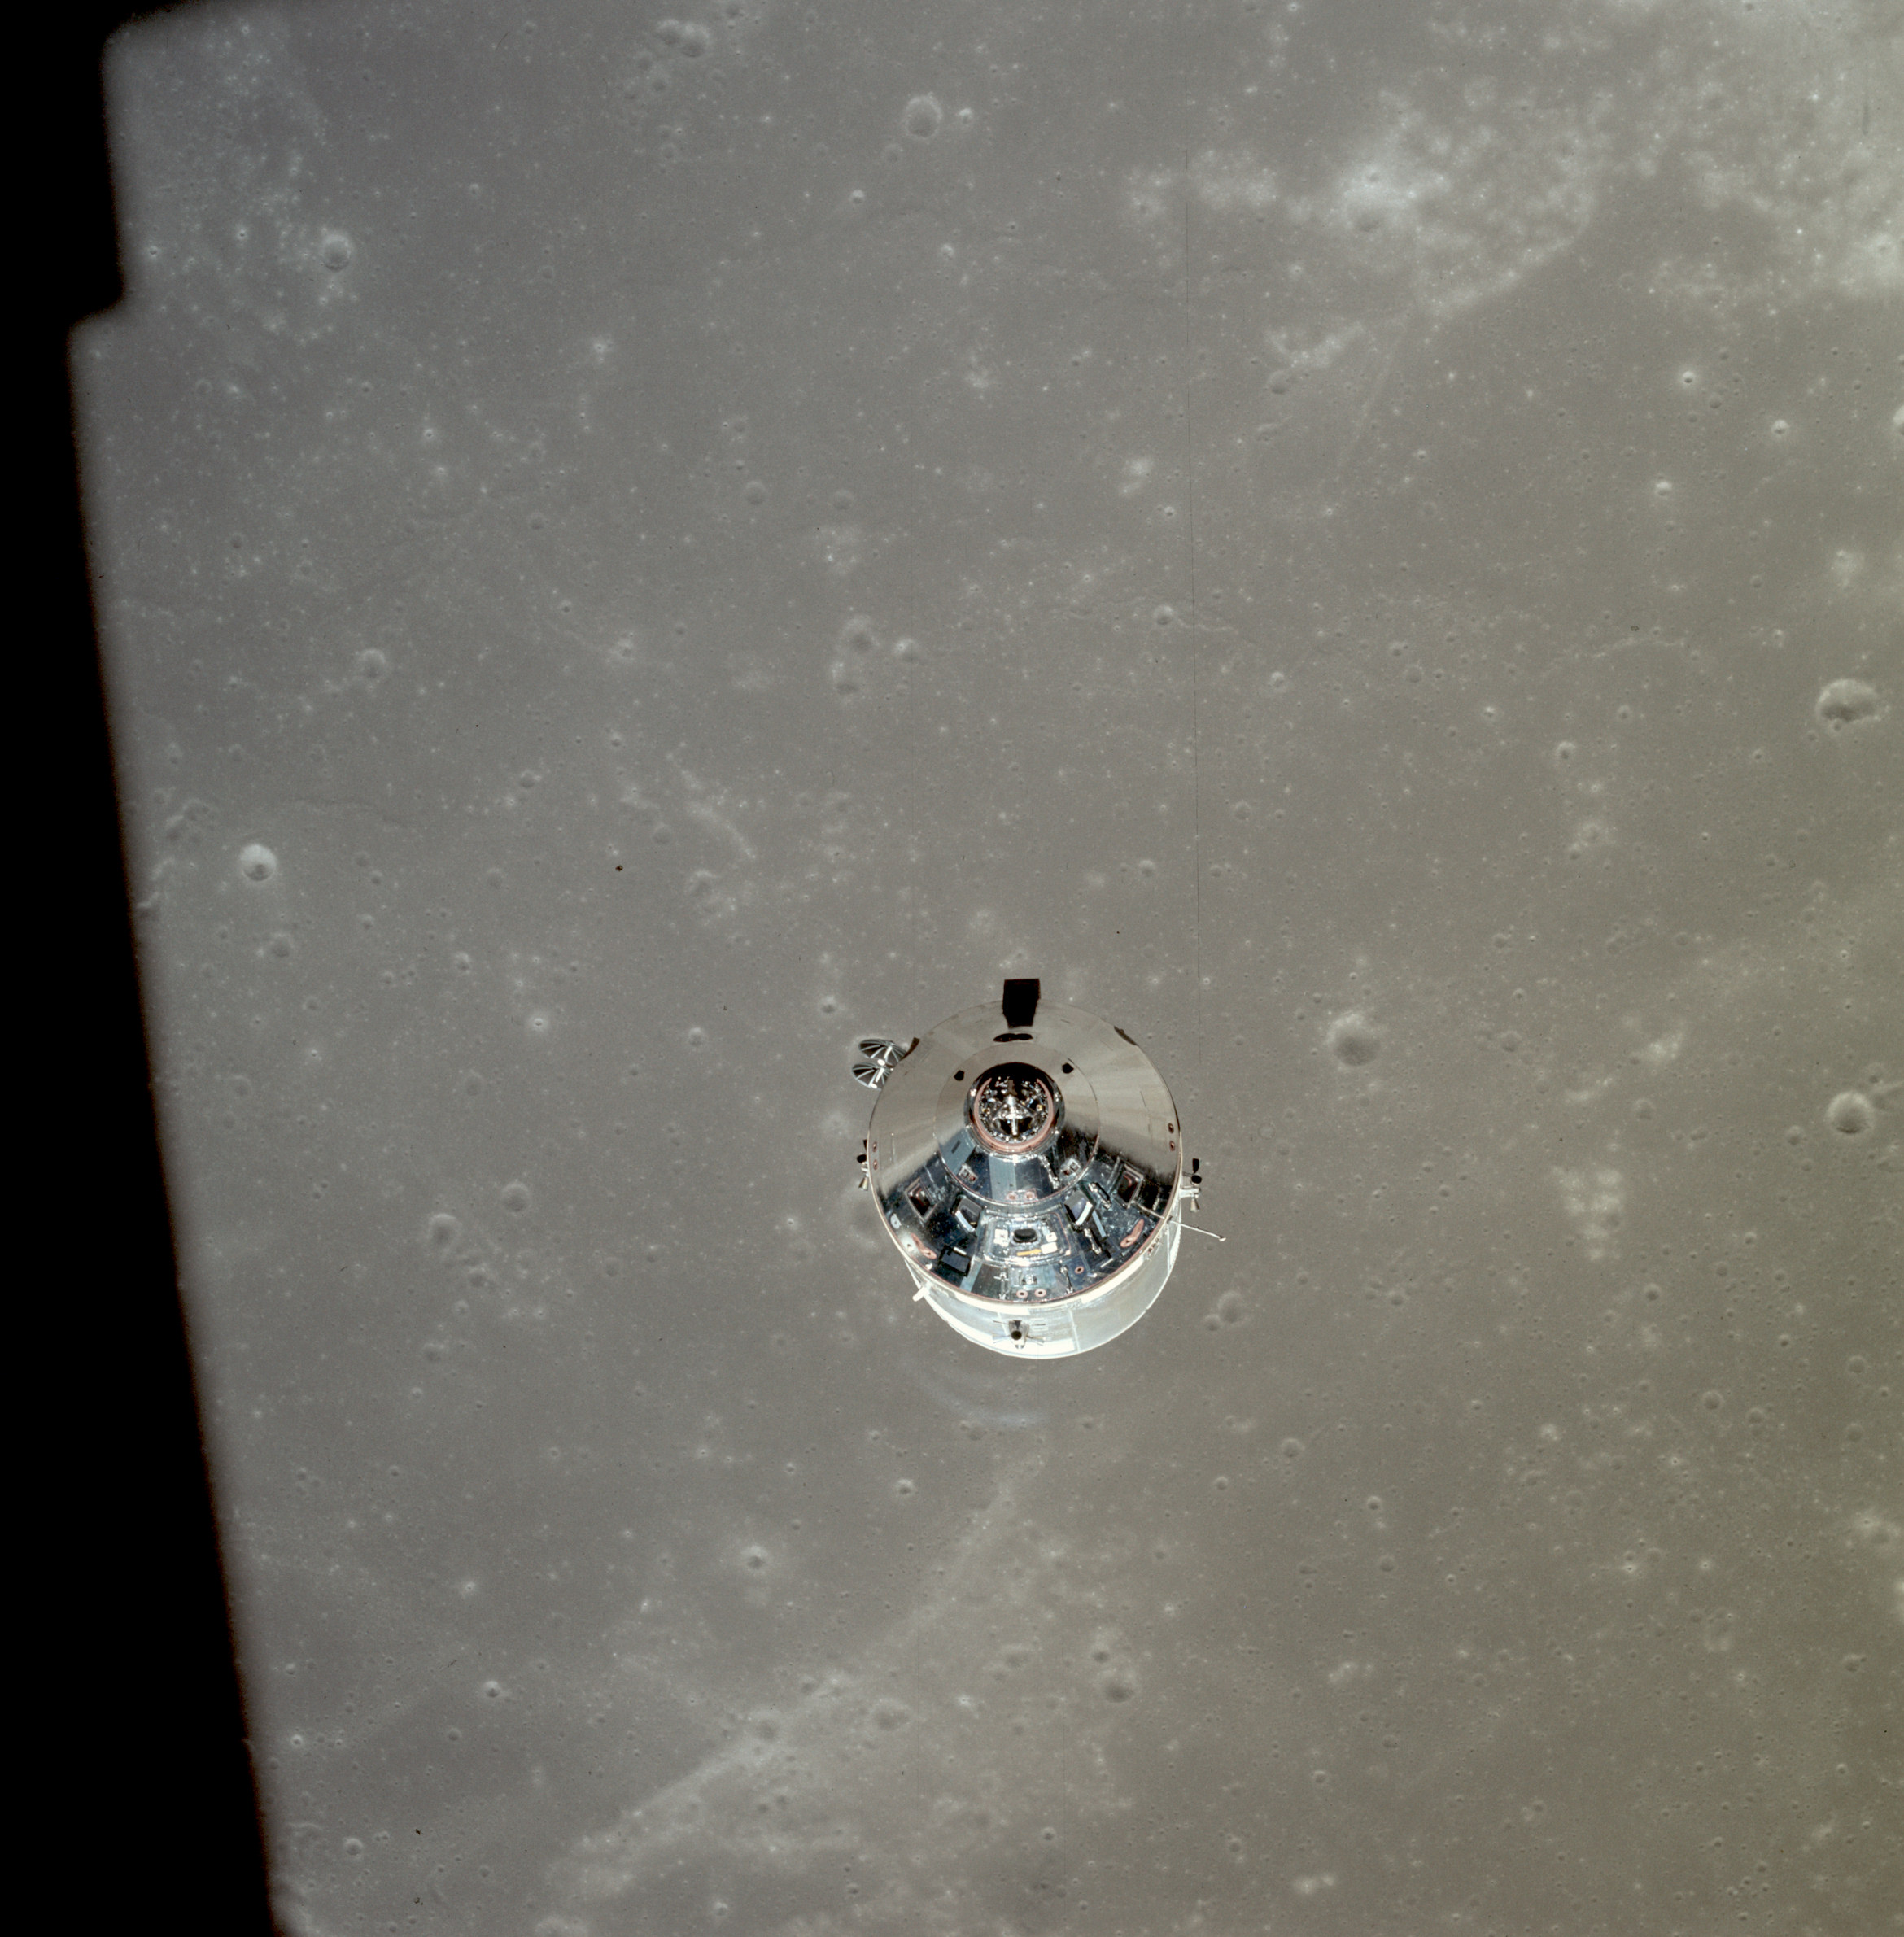 The Apollo 11 command and service module orbits the Moon shortly after jettisoning the Eagle lunar module on July 20, 1969.